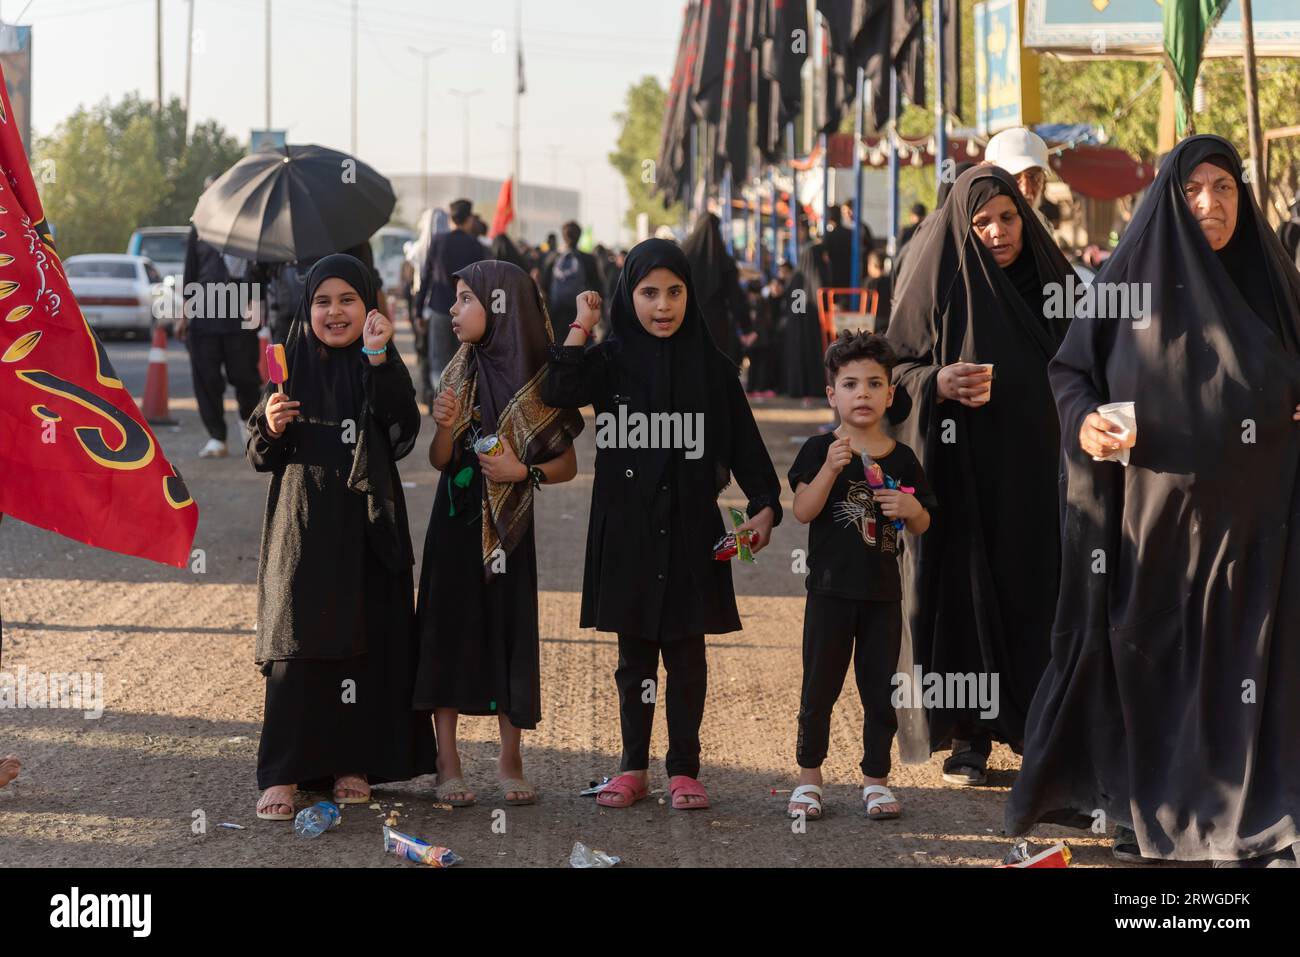 Najaf, Iraq. 3rd Sep, 2023. Iraqi Shia girls shout religious slogans as Shia Muslim pilgrims march from Najaf towards Shrine city of Karbala. Every year, millions of Shia Muslims and some from other faiths undertake a 20-day pilgrimage on foot from various cities in Iraq and Iran to the holy city of Karbala. This pilgrimage is in remembrance of Imam Hussein, the grandson of the Prophet Muhammad, who died in a battle in 680 AD. On the 40th day of mourning for Hussein, known as Arbaeen, pilgrims converge in Karbala to pay tribute at his shrine. Along the way, volunteers provide food, water, Stock Photo